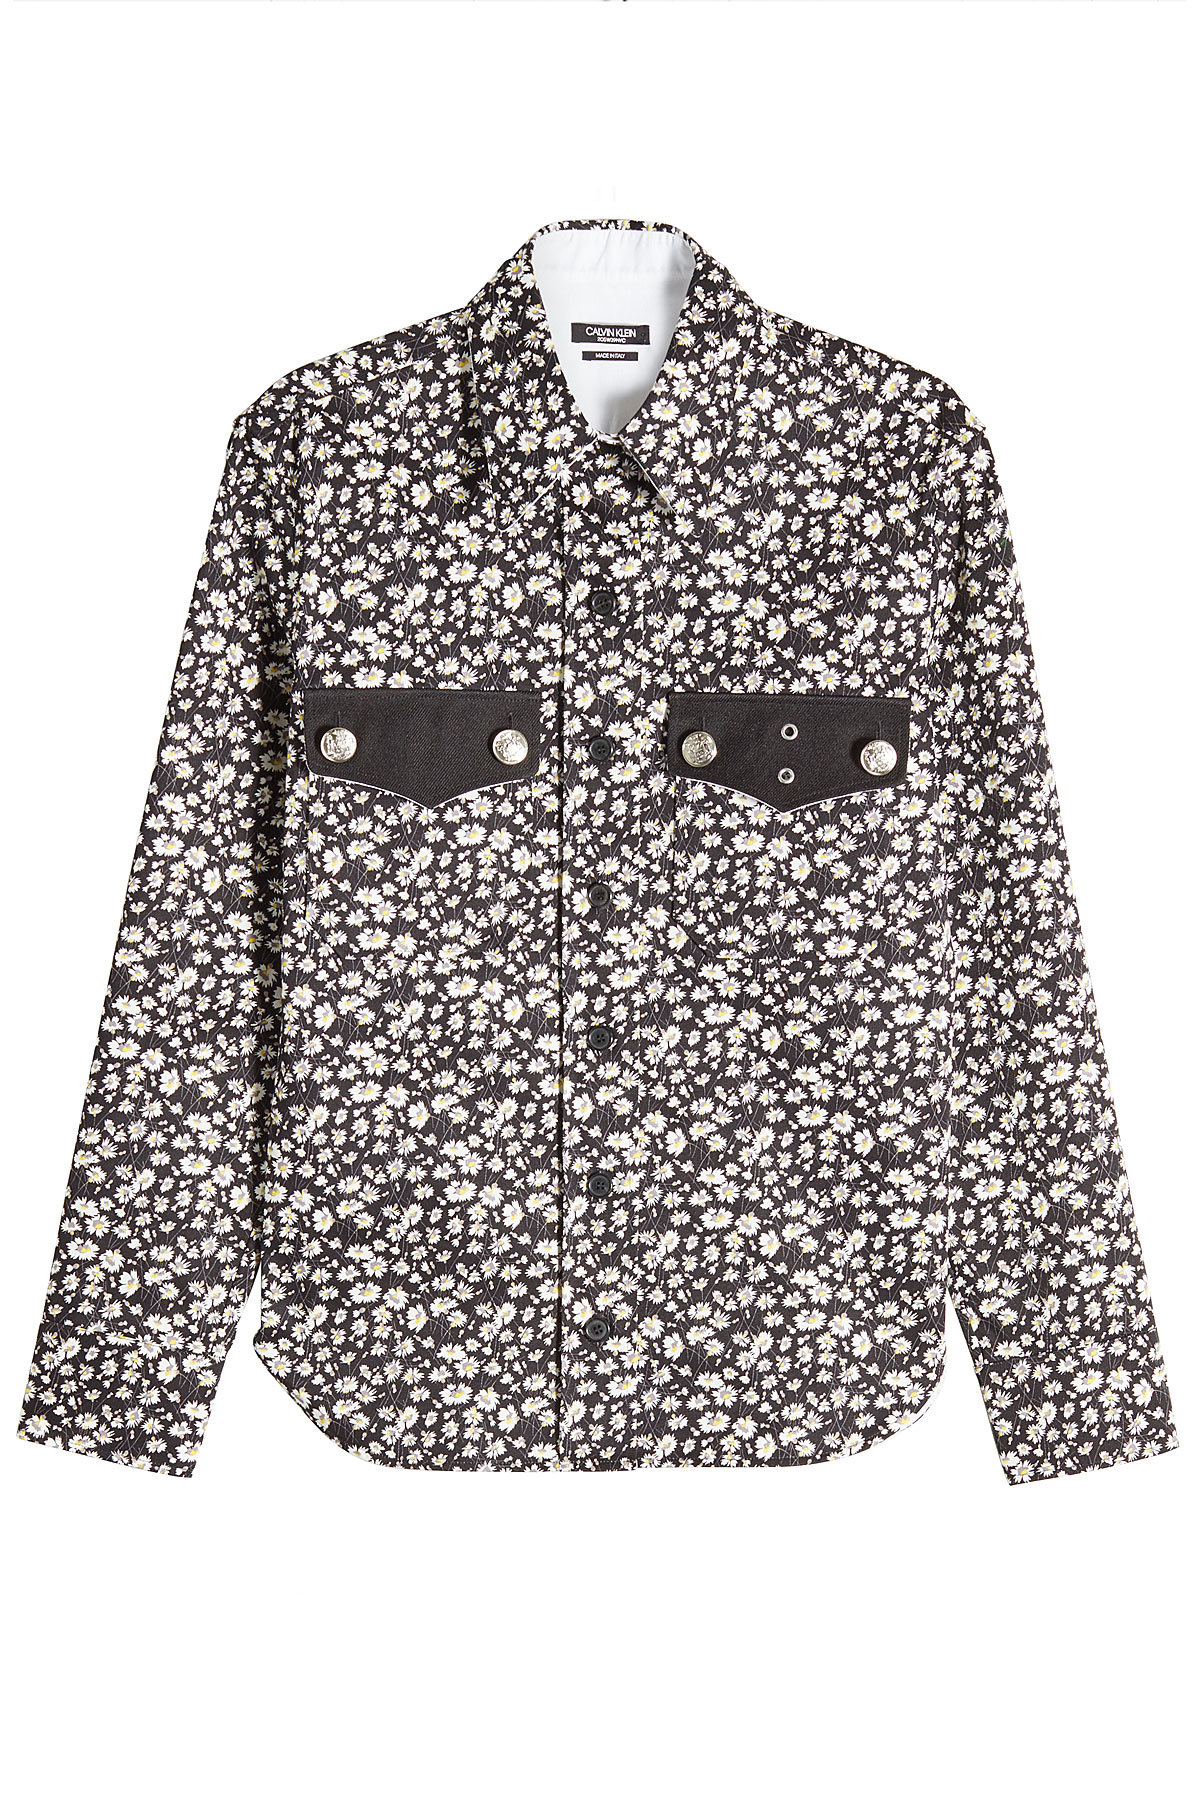 CALVIN KLEIN 205W39NYC - Printed Shirt with Embossed Buttons